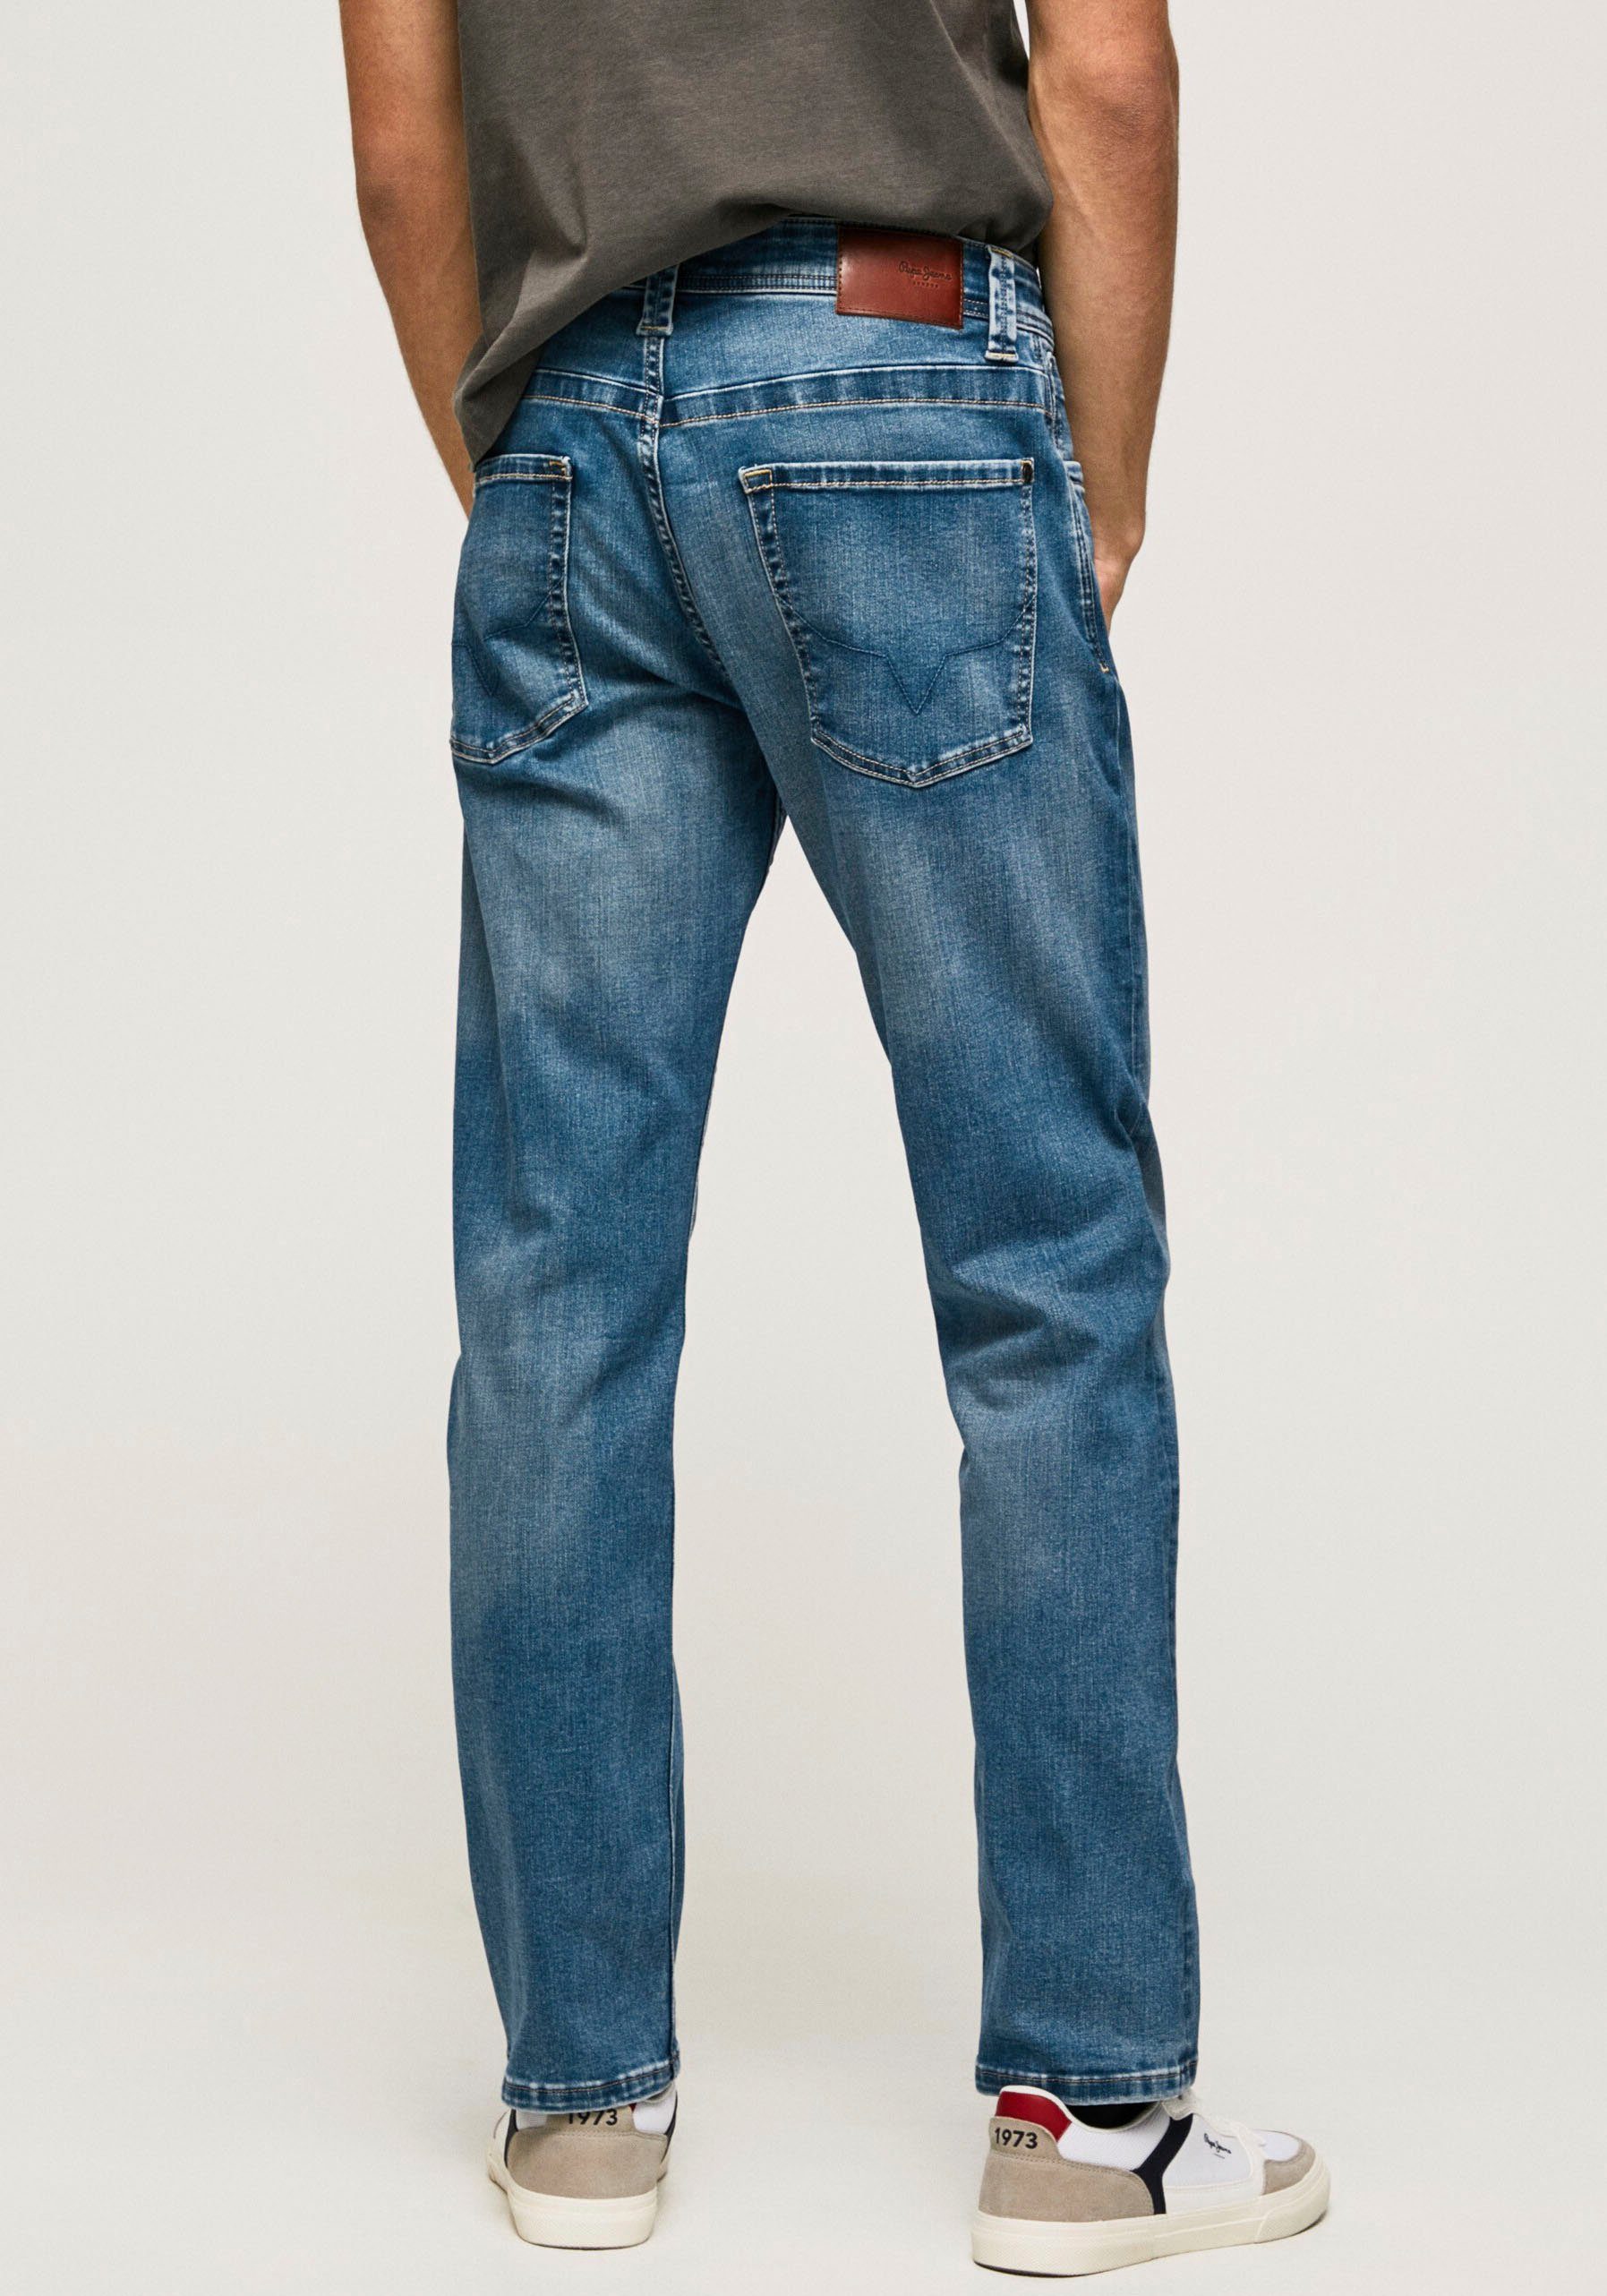 Pepe Jeans Straight-Jeans ZIP in KINGSTON 5-Pocket-Form limewiser